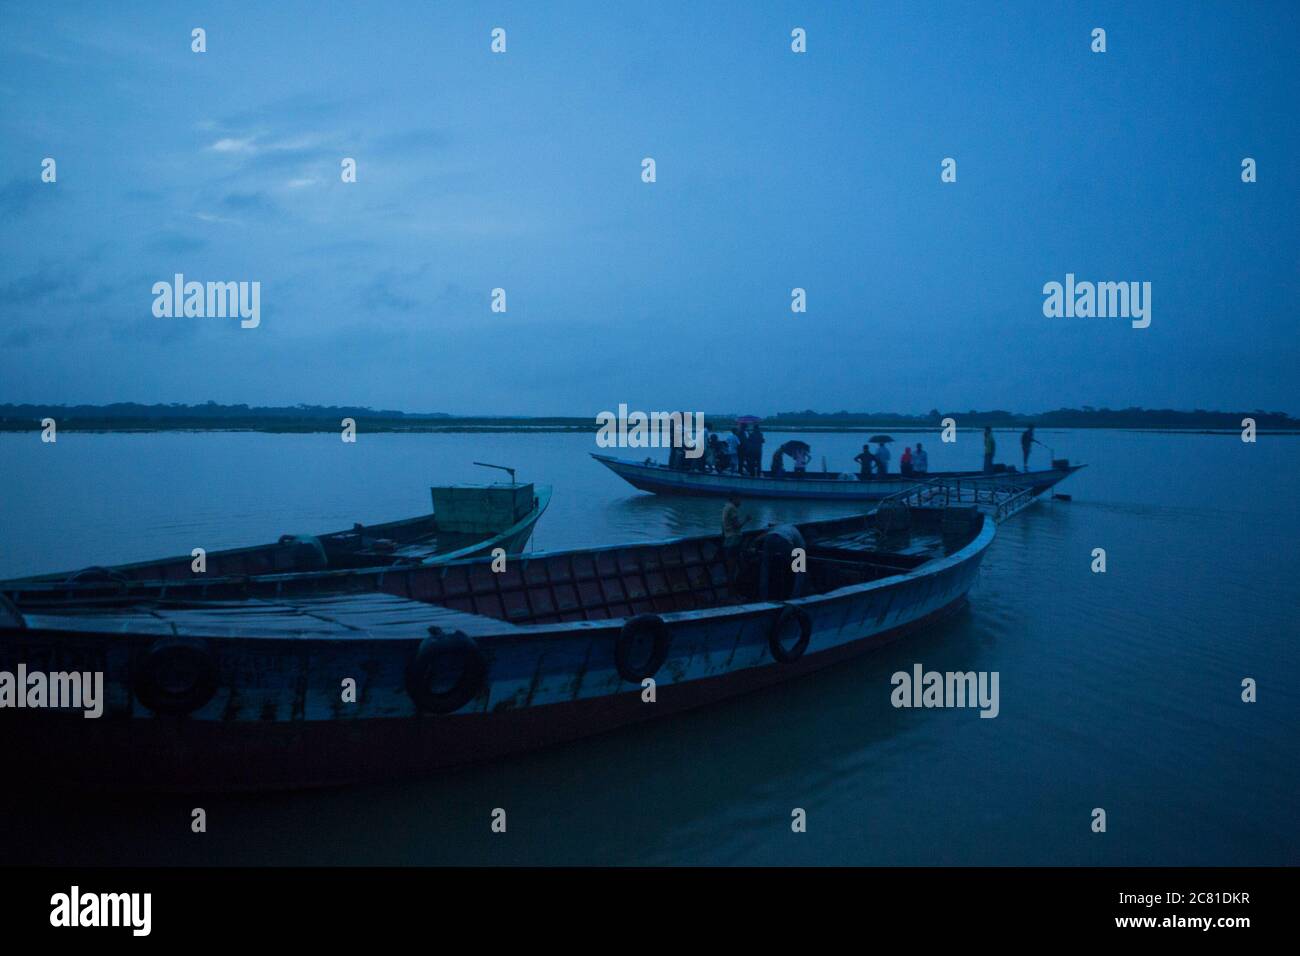 Blue evening light covers the boats and waters of the river Kirtonkhal, near Barisal, Bangladesh. These country boats carry passengers while others are idle and float on the water of the river. Stock Photo